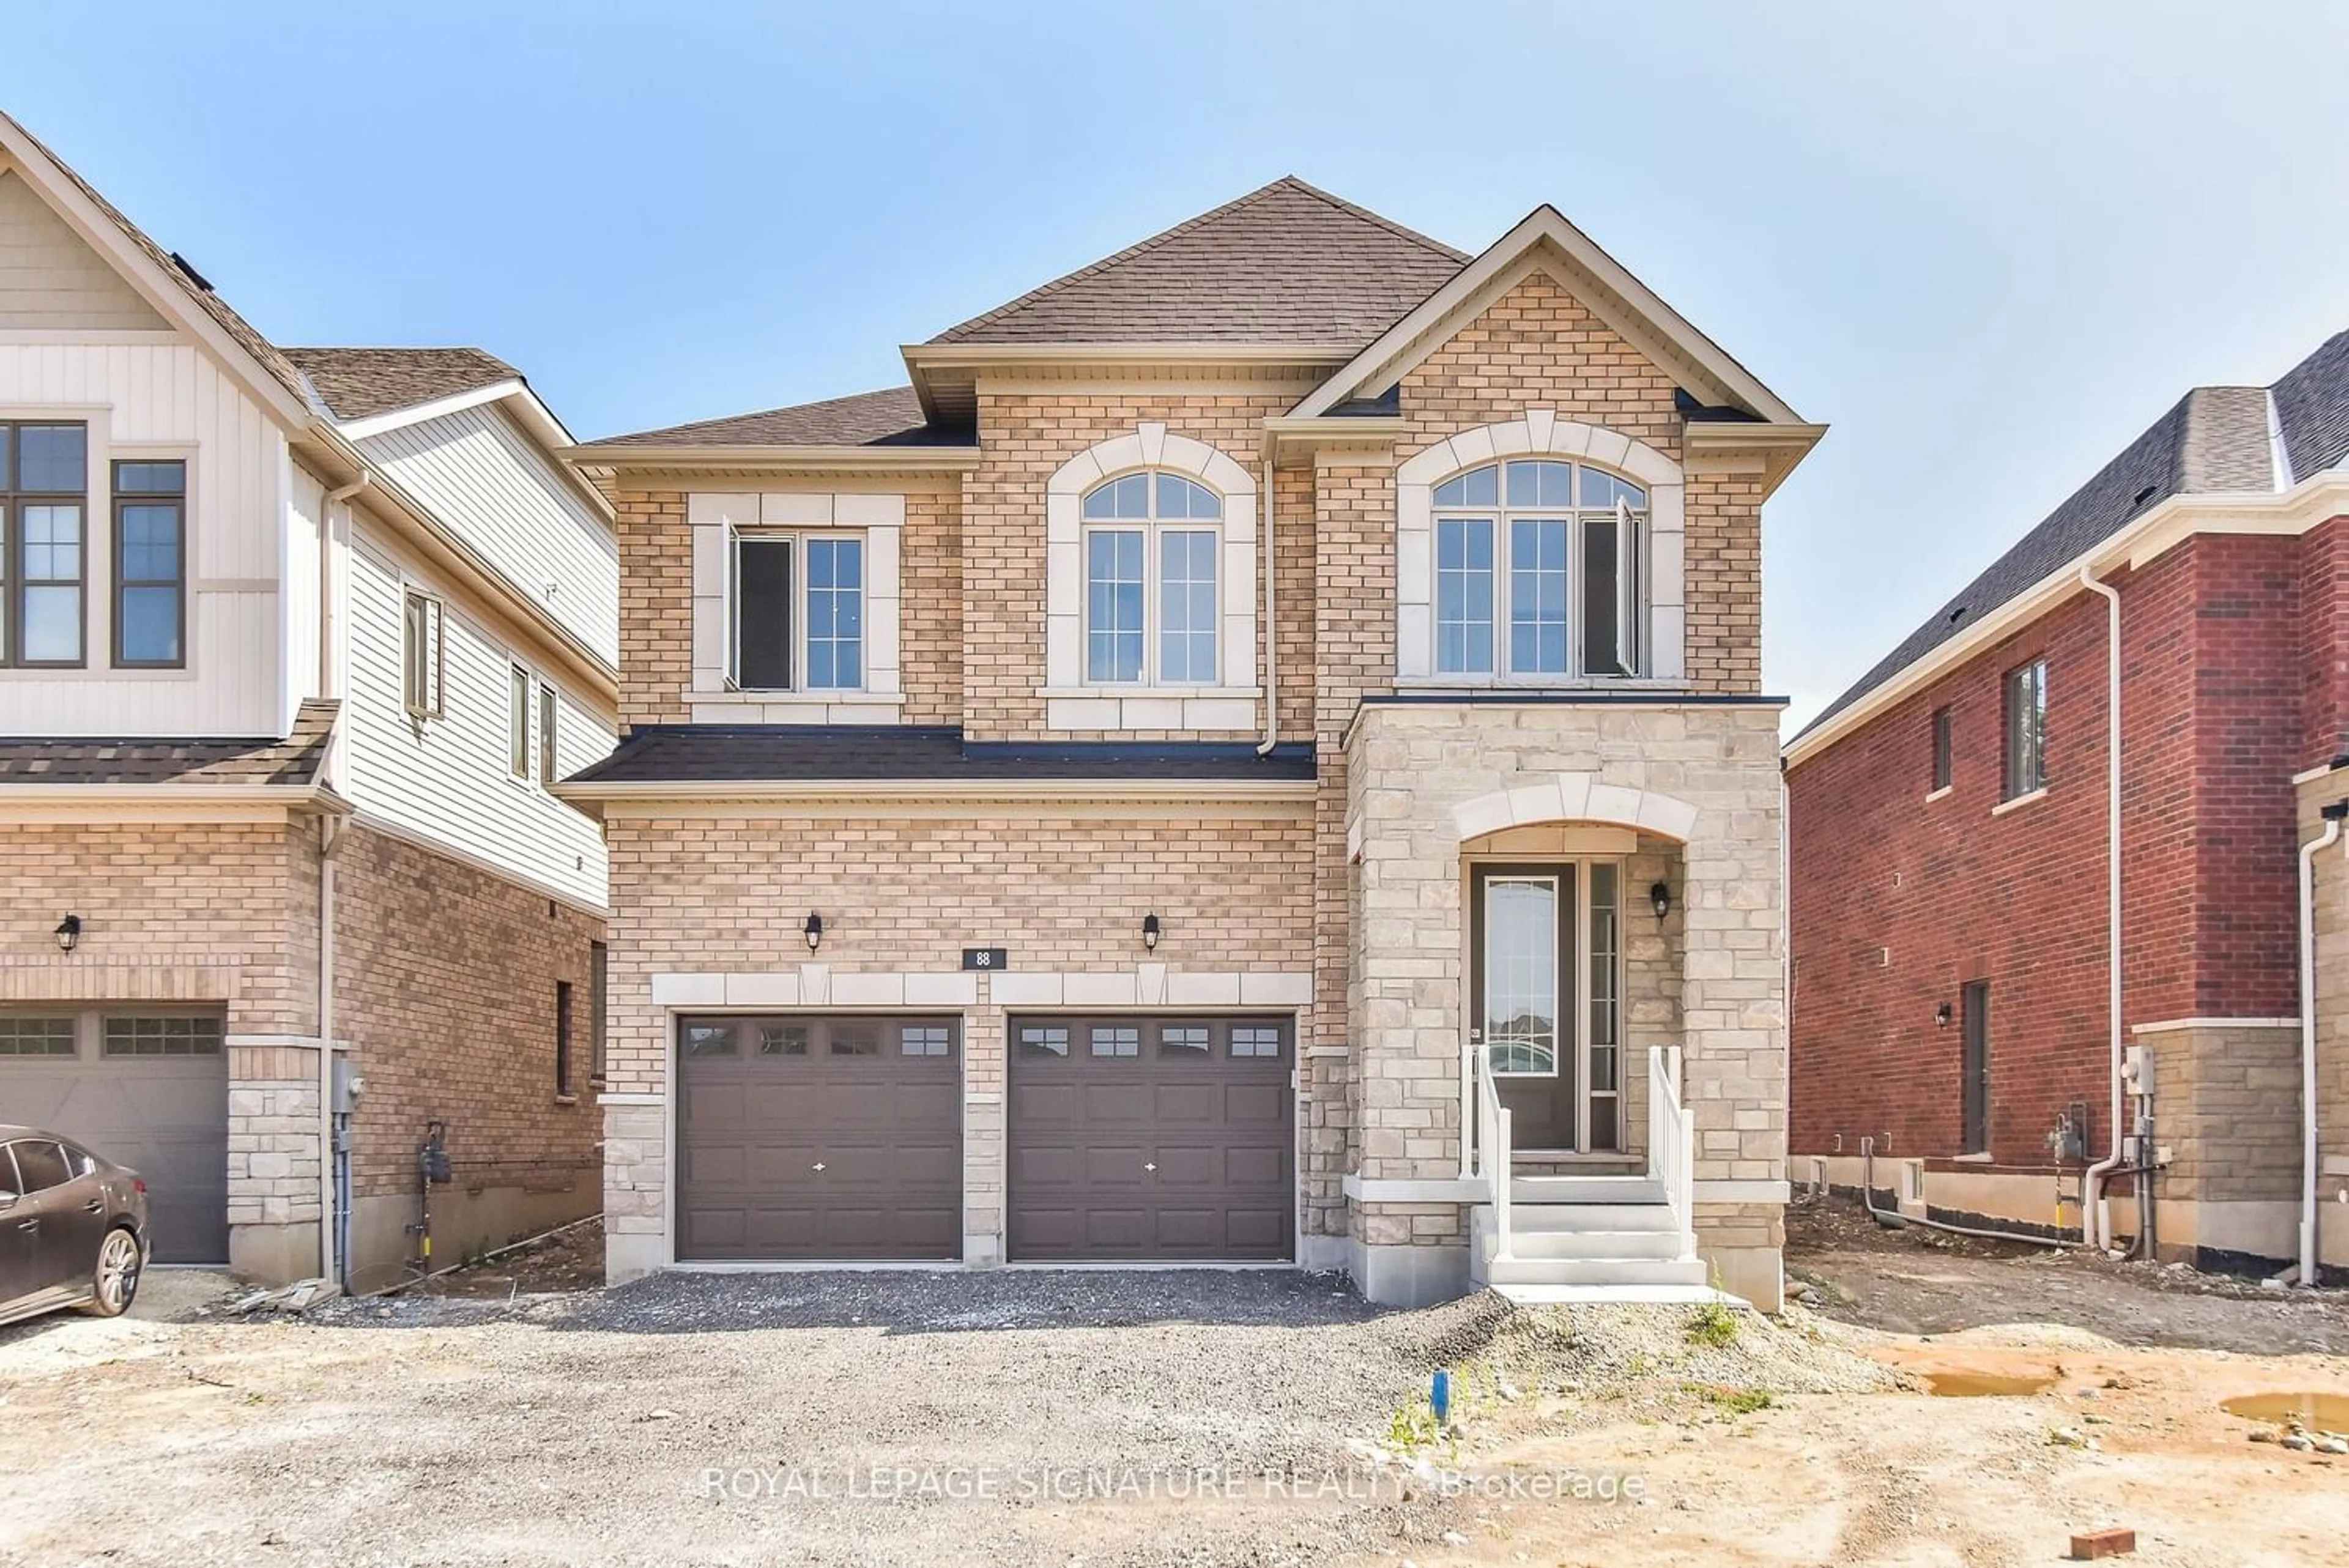 Home with brick exterior material for 88 Garland Ave, Cambridge Ontario N1T 1N9